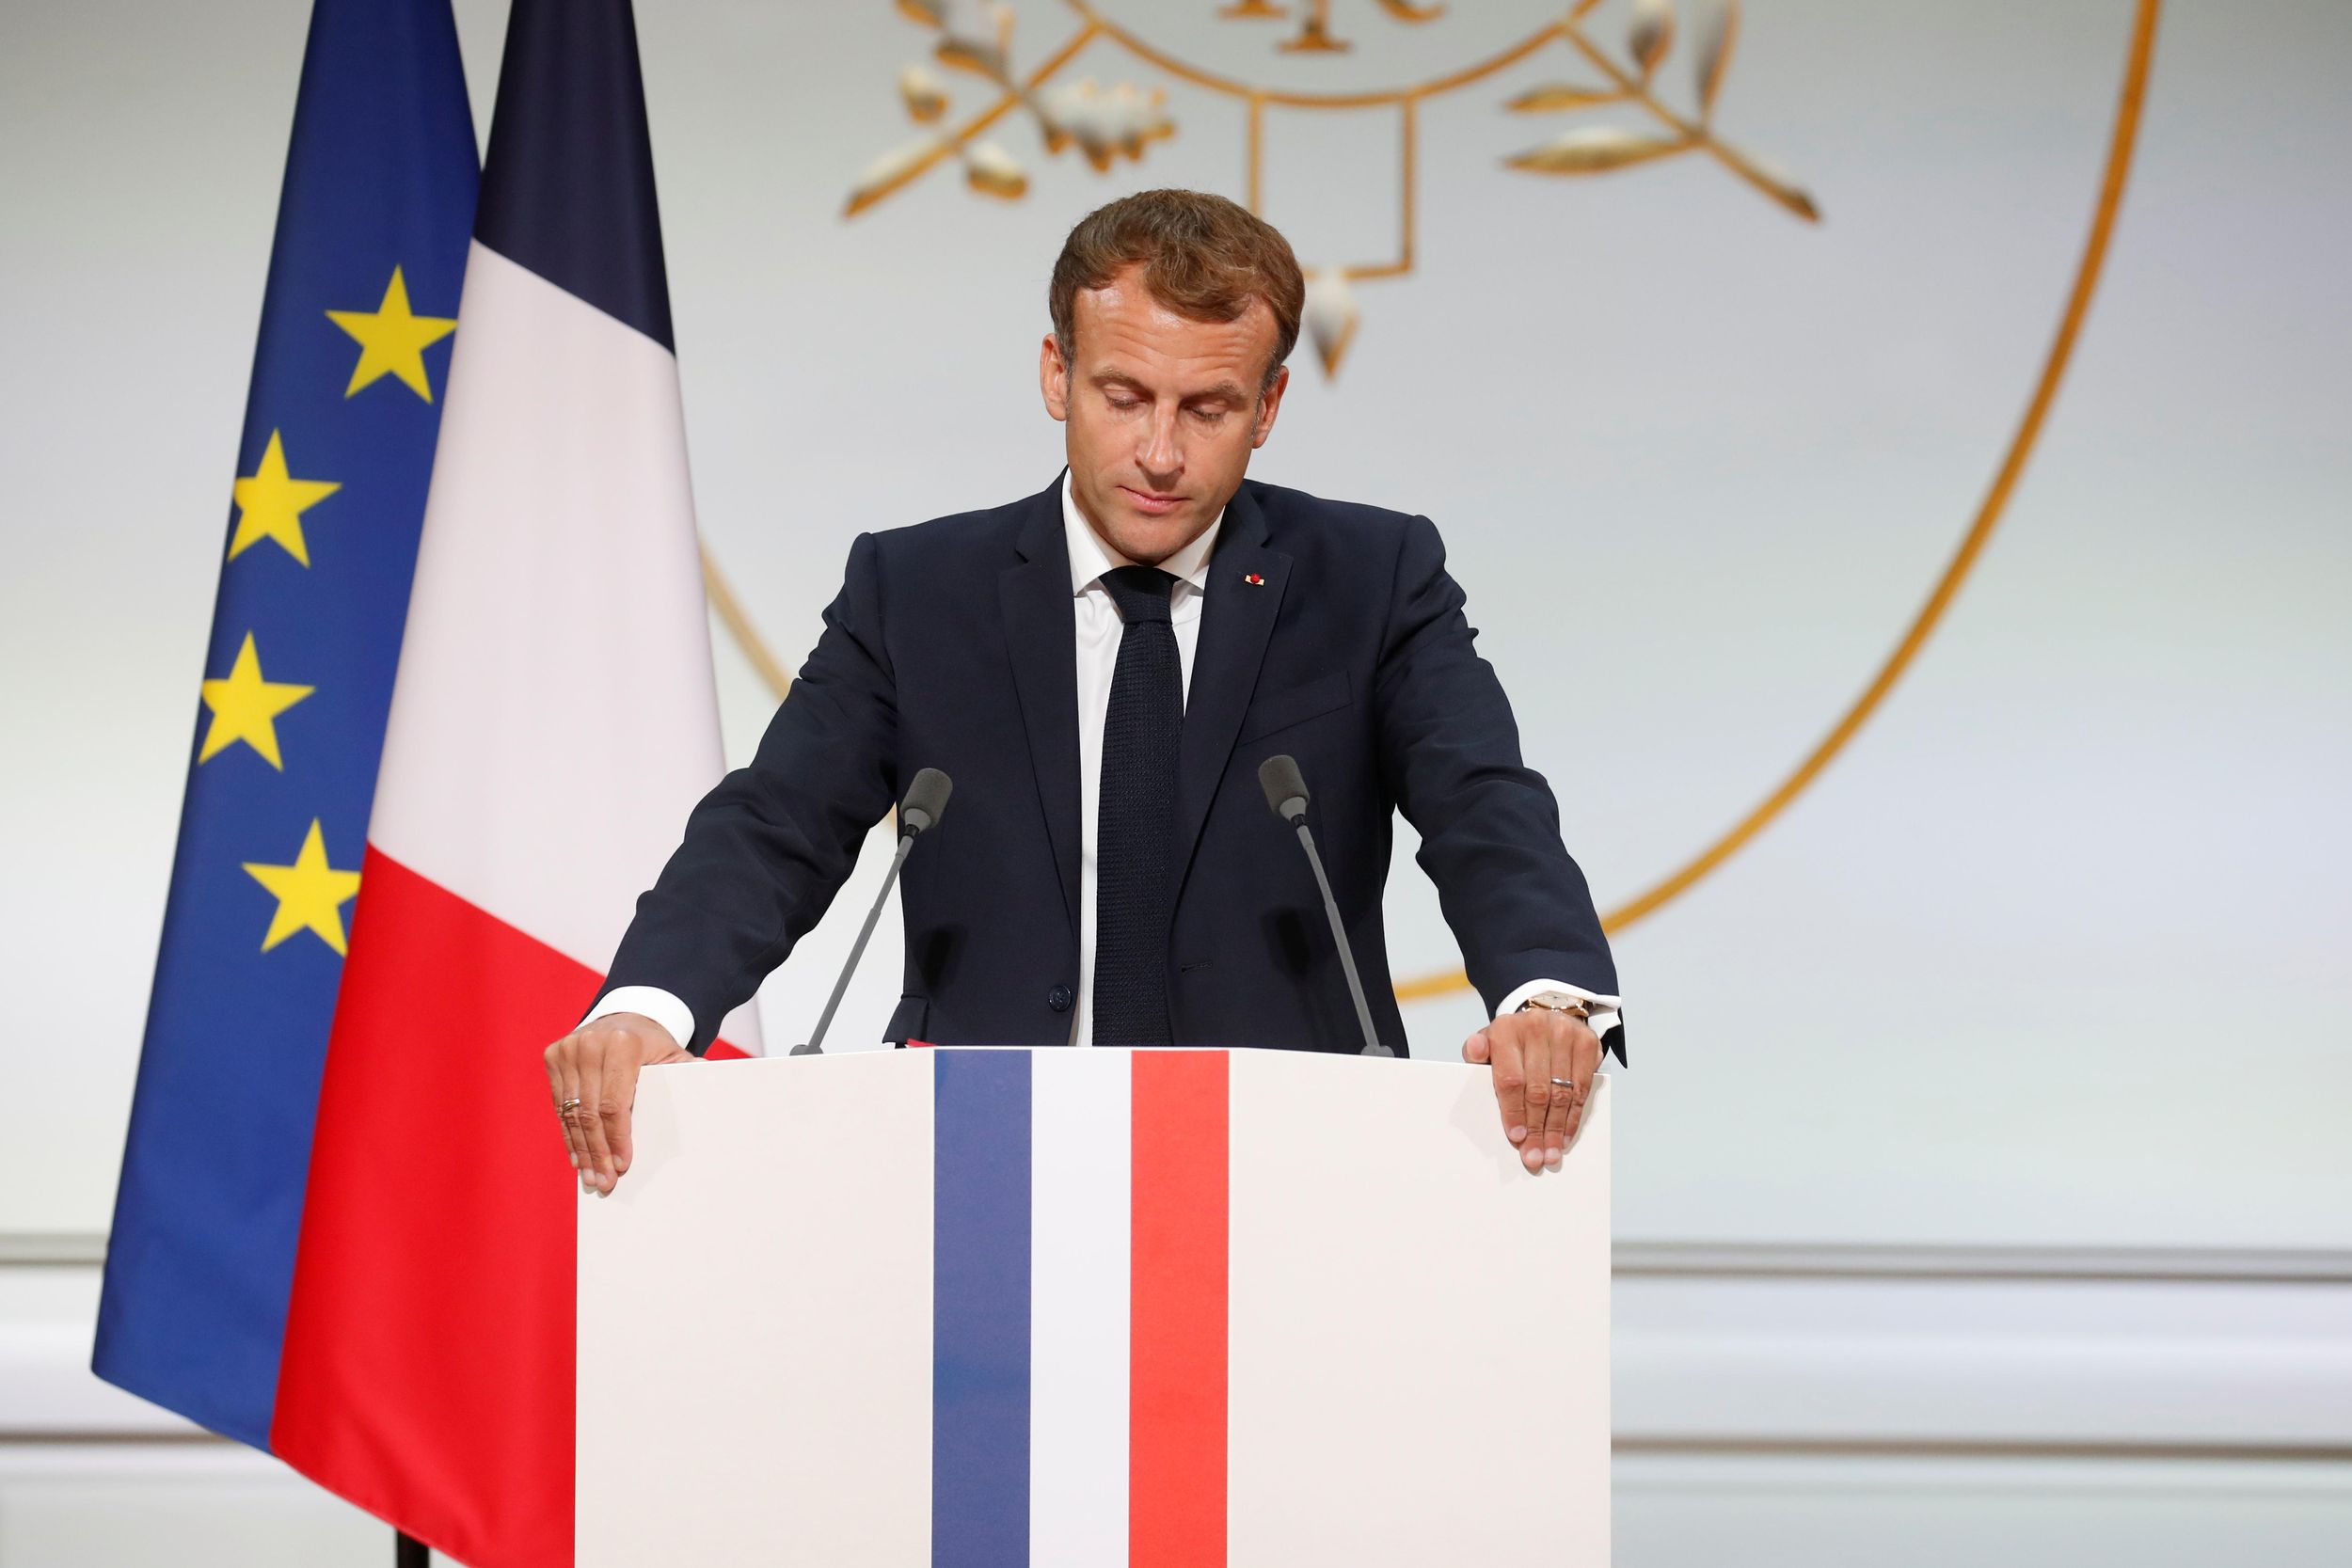 French President Emmanuel Macron delivers a speech during a ceremony in memory of the Harkis, Algerians who helped the French Army in the Algerian War of Independence, at the Elysee Palace in Paris, France, September 20, 2021.